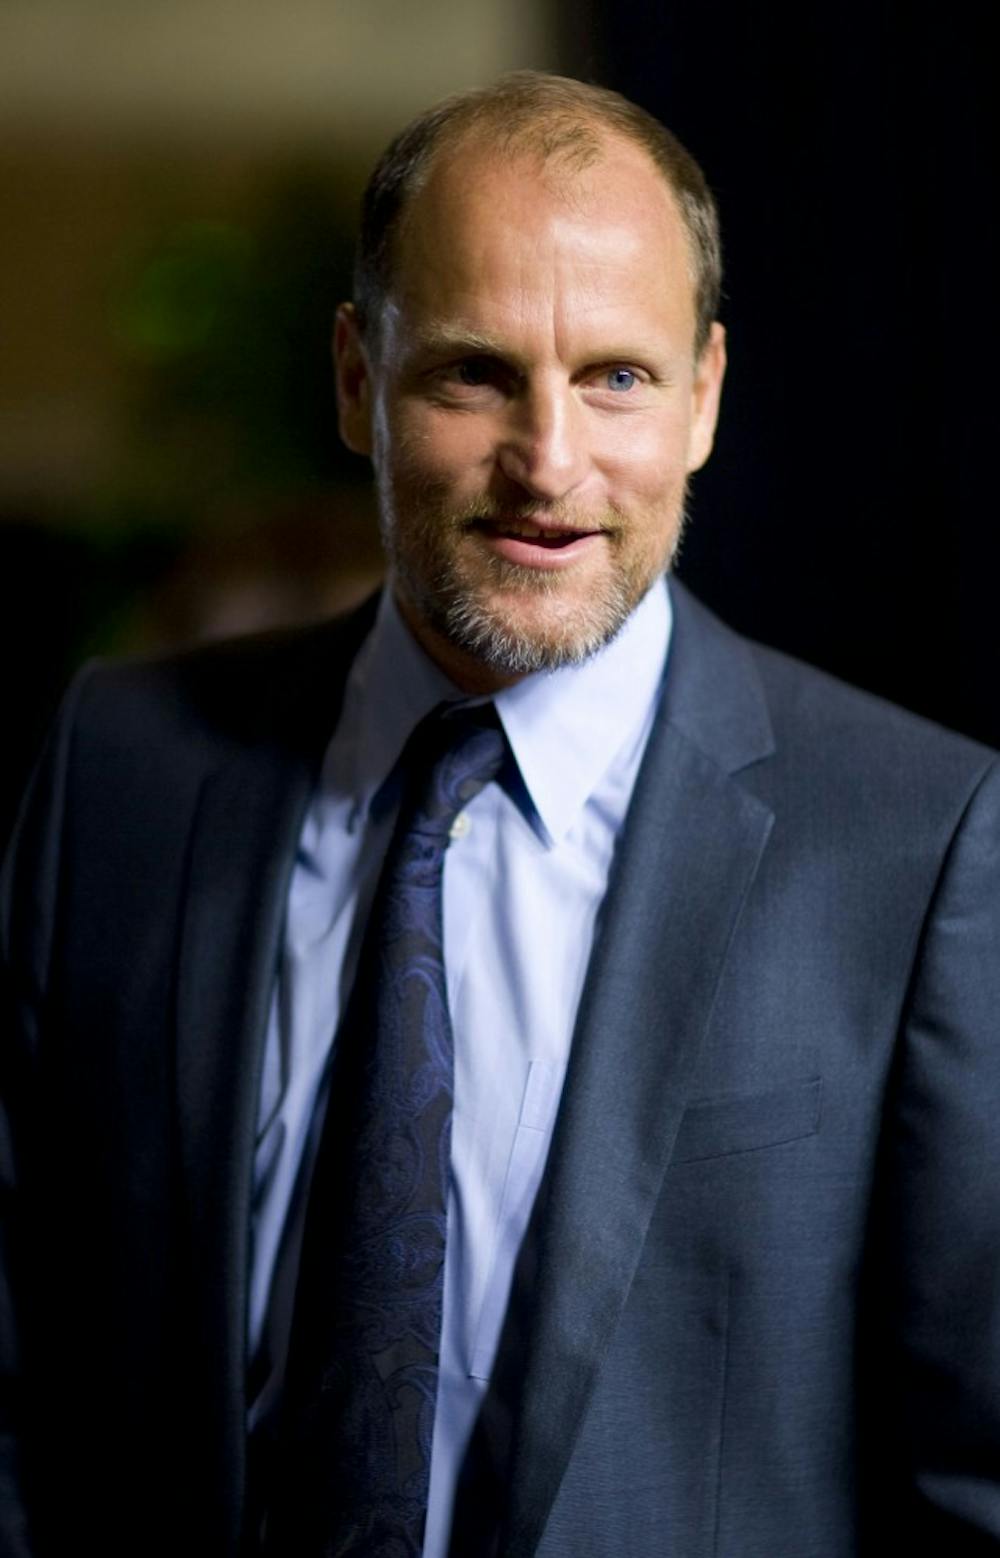 Woody Harrelson arrives at the nominees luncheon for the 82nd Annual Academy Awards in Beverly Hills, California, Monday, February 15, 2010. (Armando Arorizo/Landov/MCT)